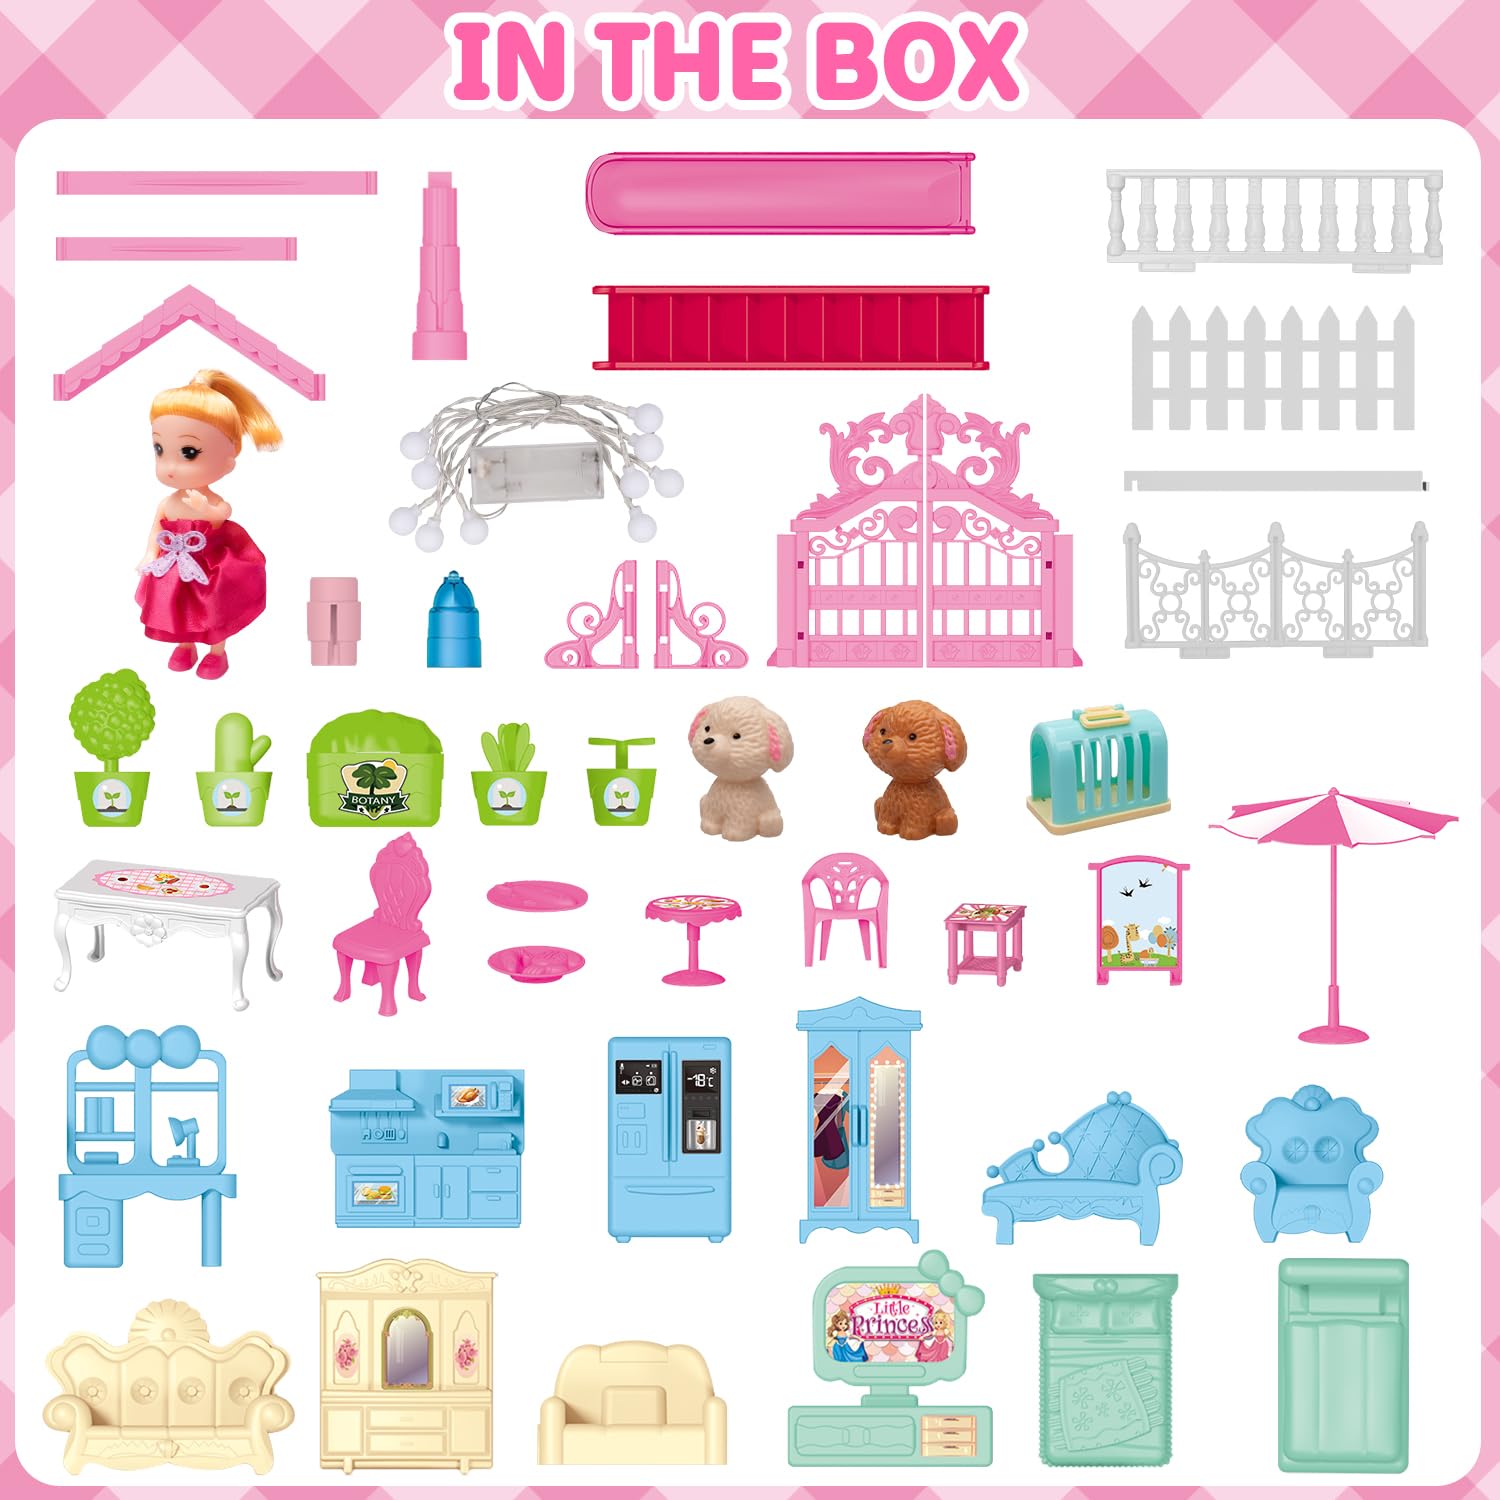 (13 Rooms) 292 PCS Dollhouse Building Playset, Pink Princess Castle Playhouse with Dolls, Furniture, Accessories, Pretend Play Dreamhouse Toys for 3 4 5 6 7 8 9 10 Years Old Girls Kids Toddlers Gifts